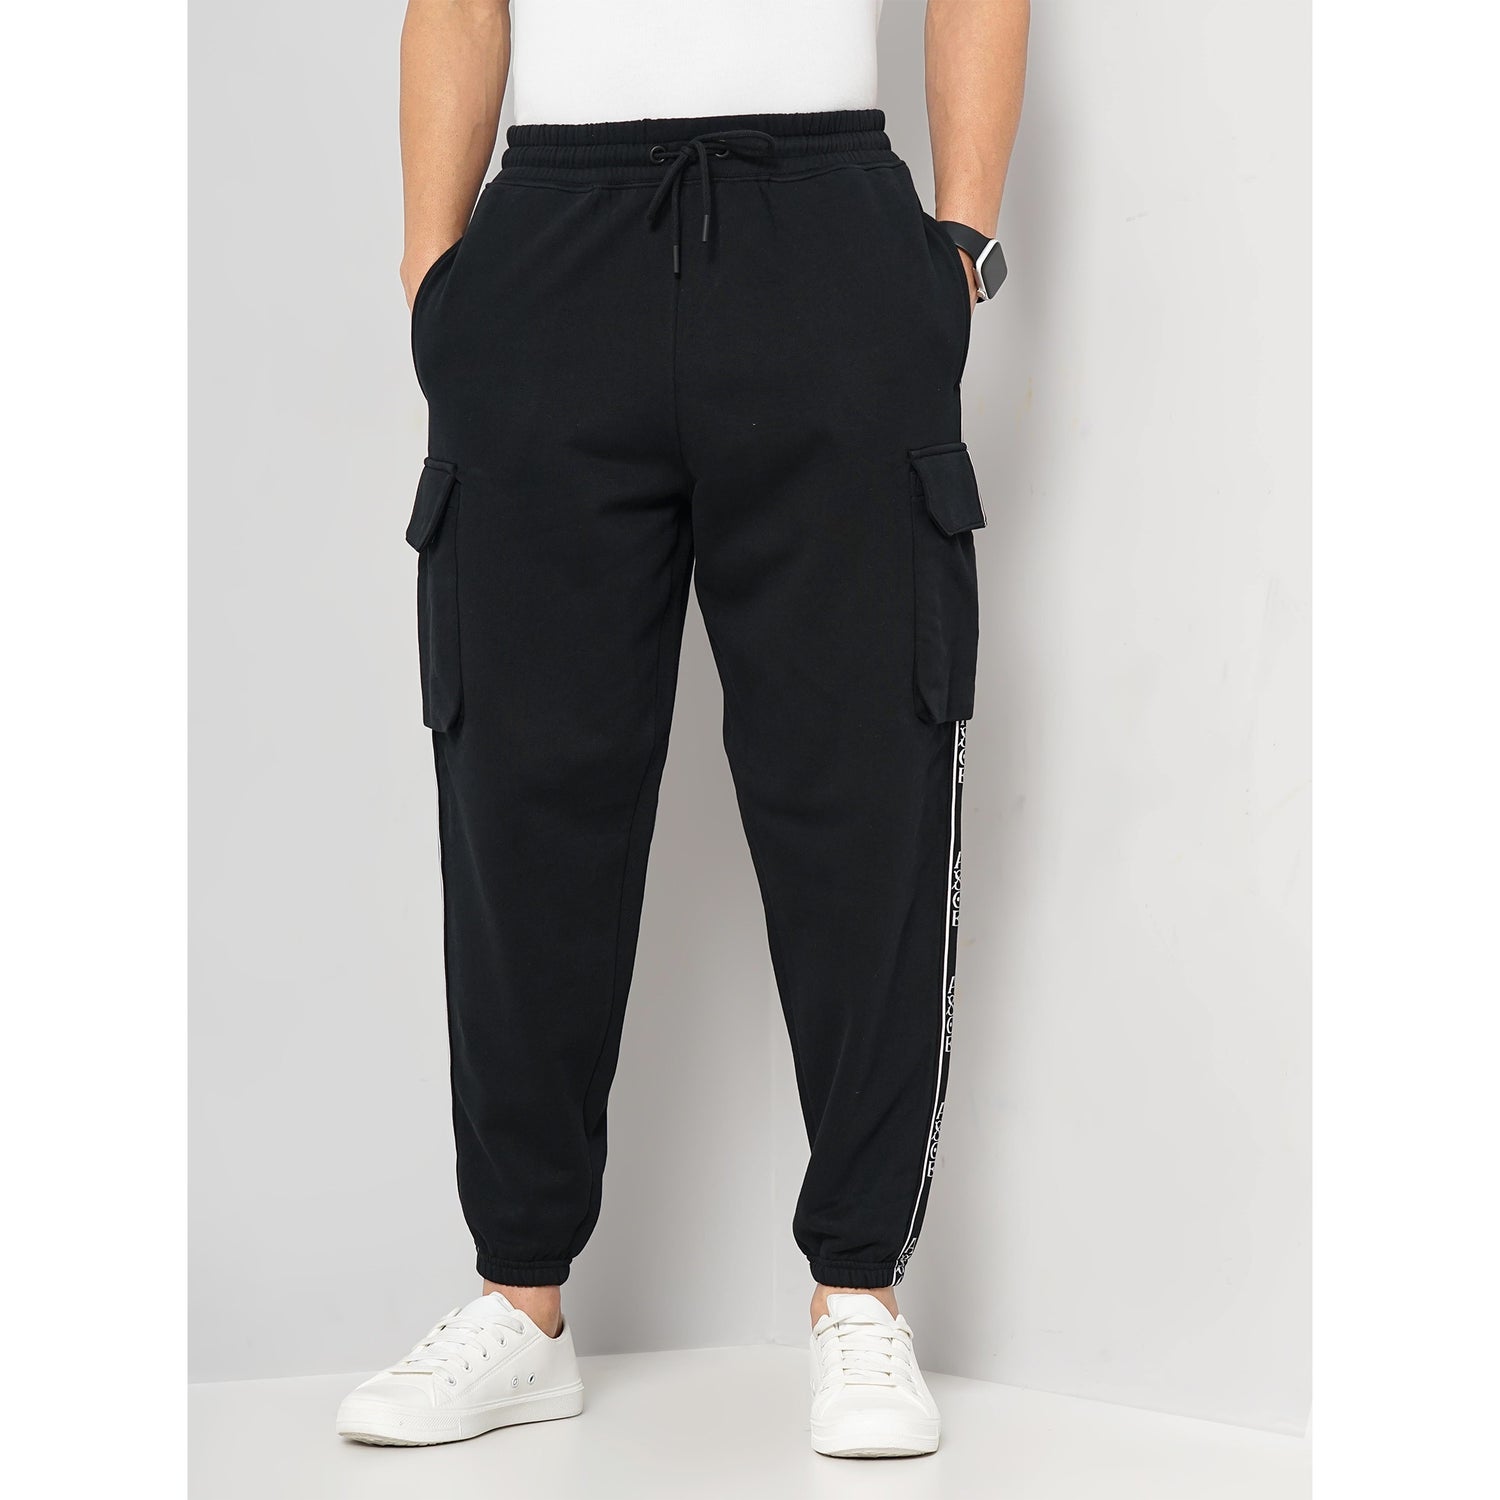 One Piece - Men's Black Printed Regular Fit Cotton Casual Trackpant (LFOACE2IN)